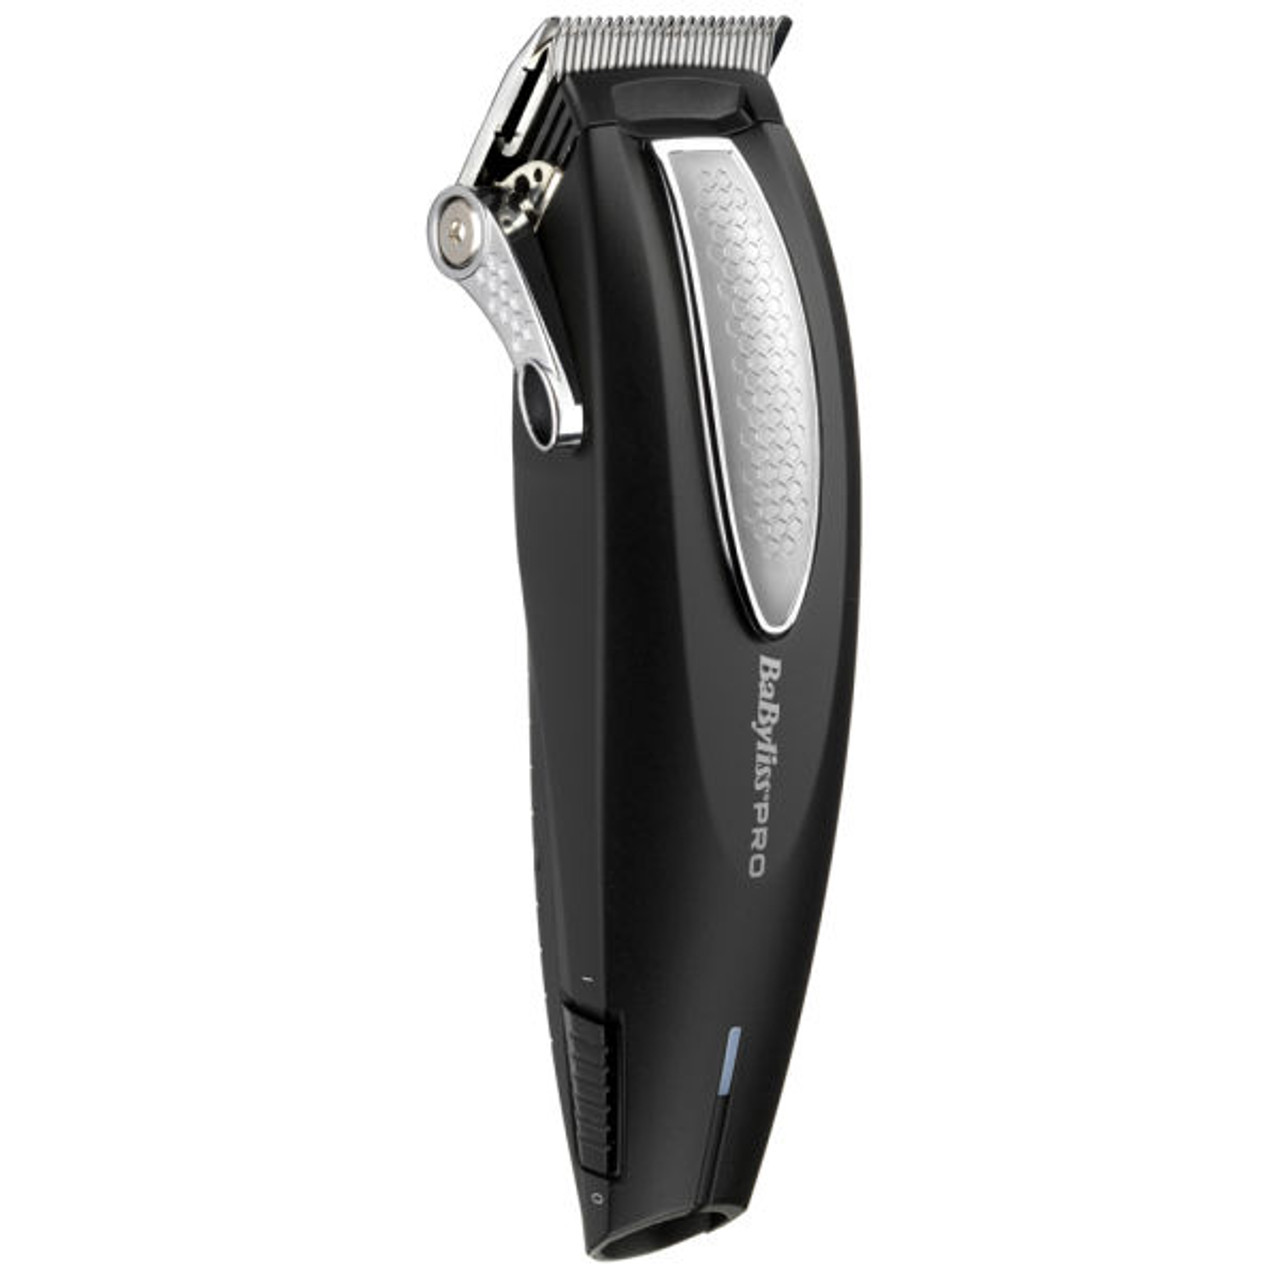 babyliss professional hair clipper